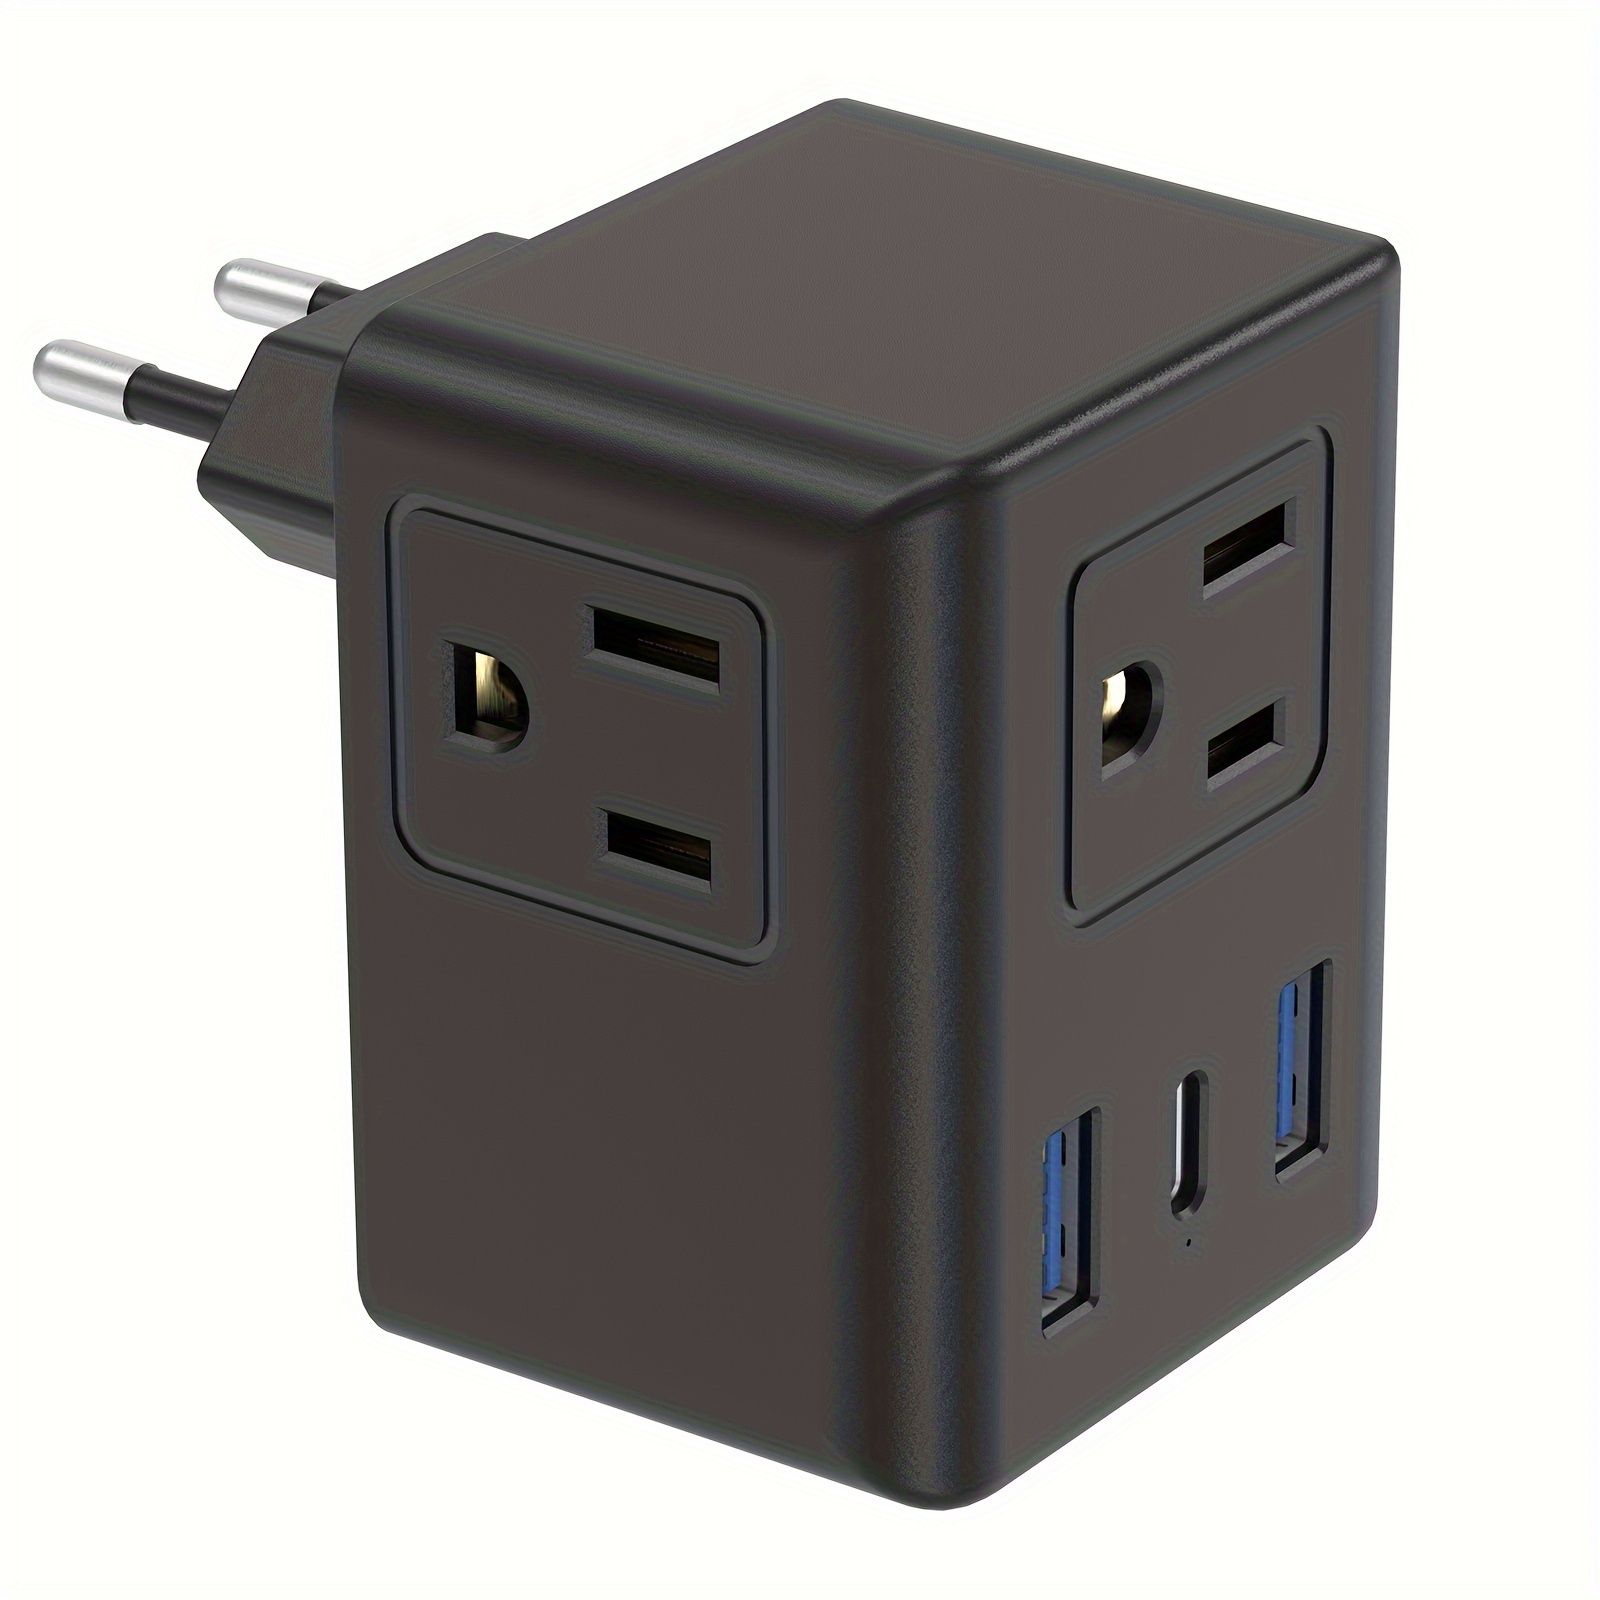 1pc UK to EU Plug Adapter 220V Euro Travel Plug Converter AC Wall Charger  Power Adapter UK British Adapter Electrical Outlets